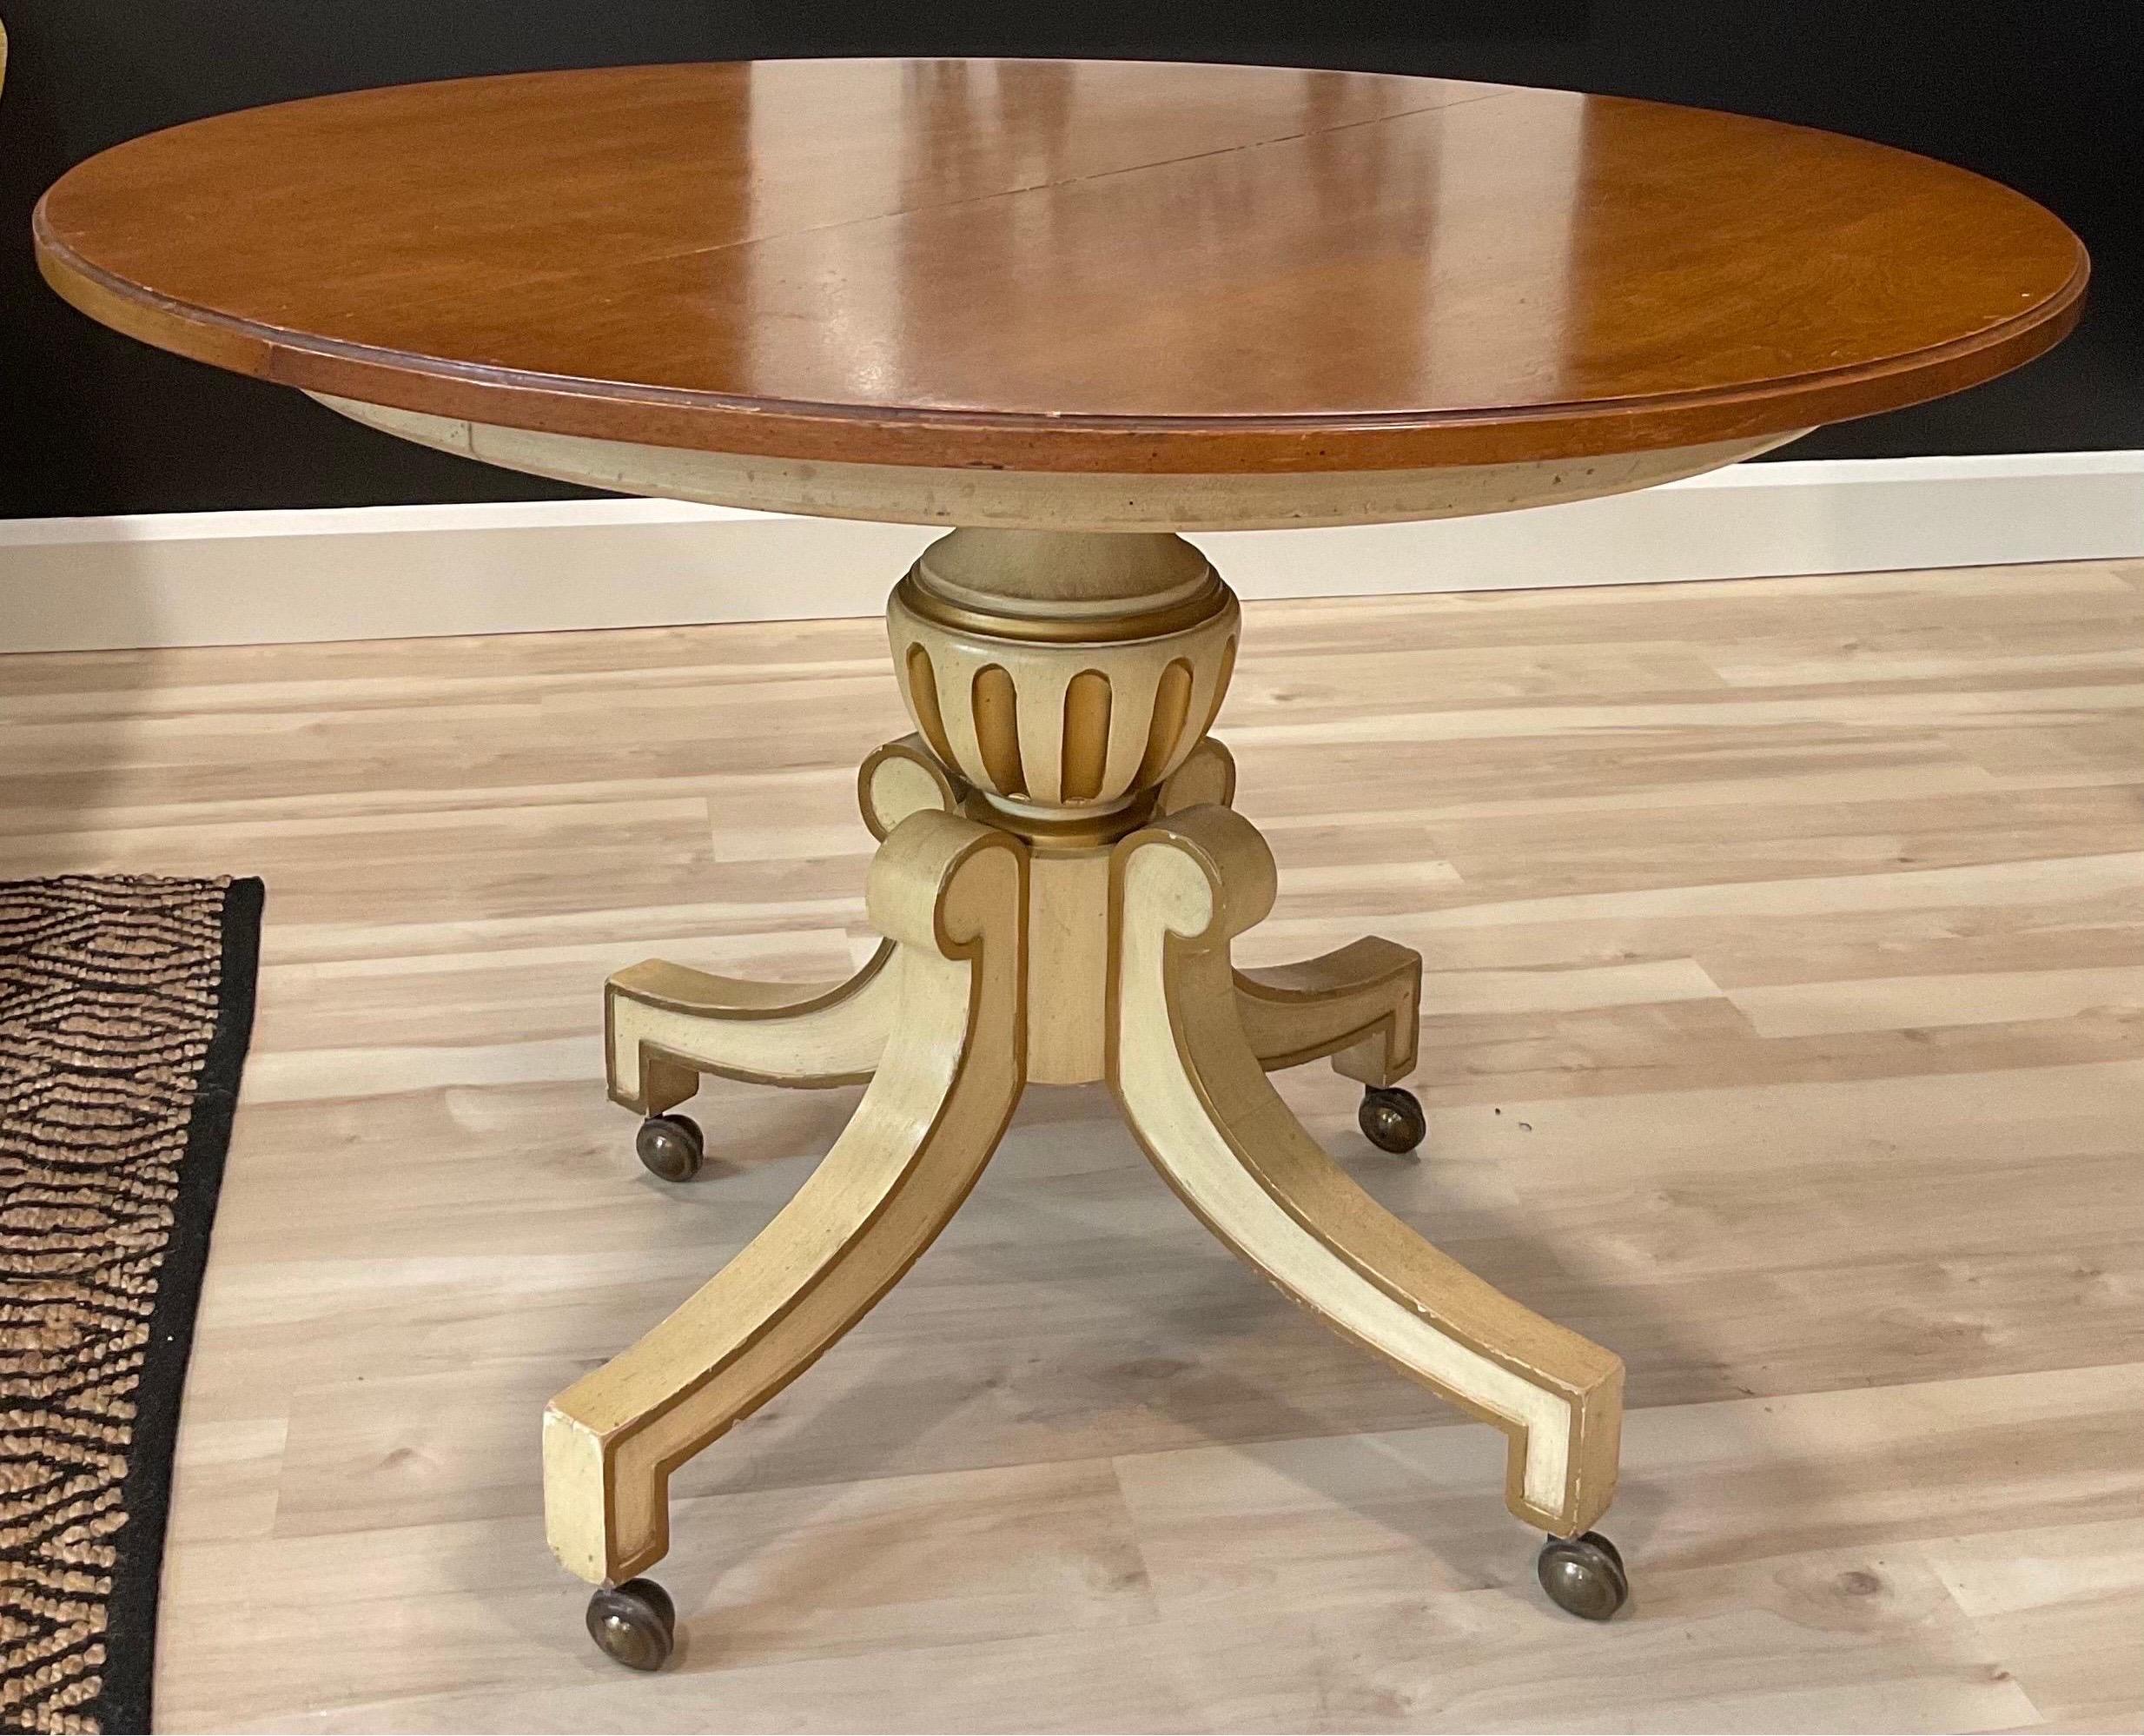 Another piece of Designer history, this Dorothy Draper designed dining table is from her Viennese Collection for Henredon. Beautiful original condition with minimal signs of wear. One owner estate find. One additional leaf.
Rare Rare Rare Draper